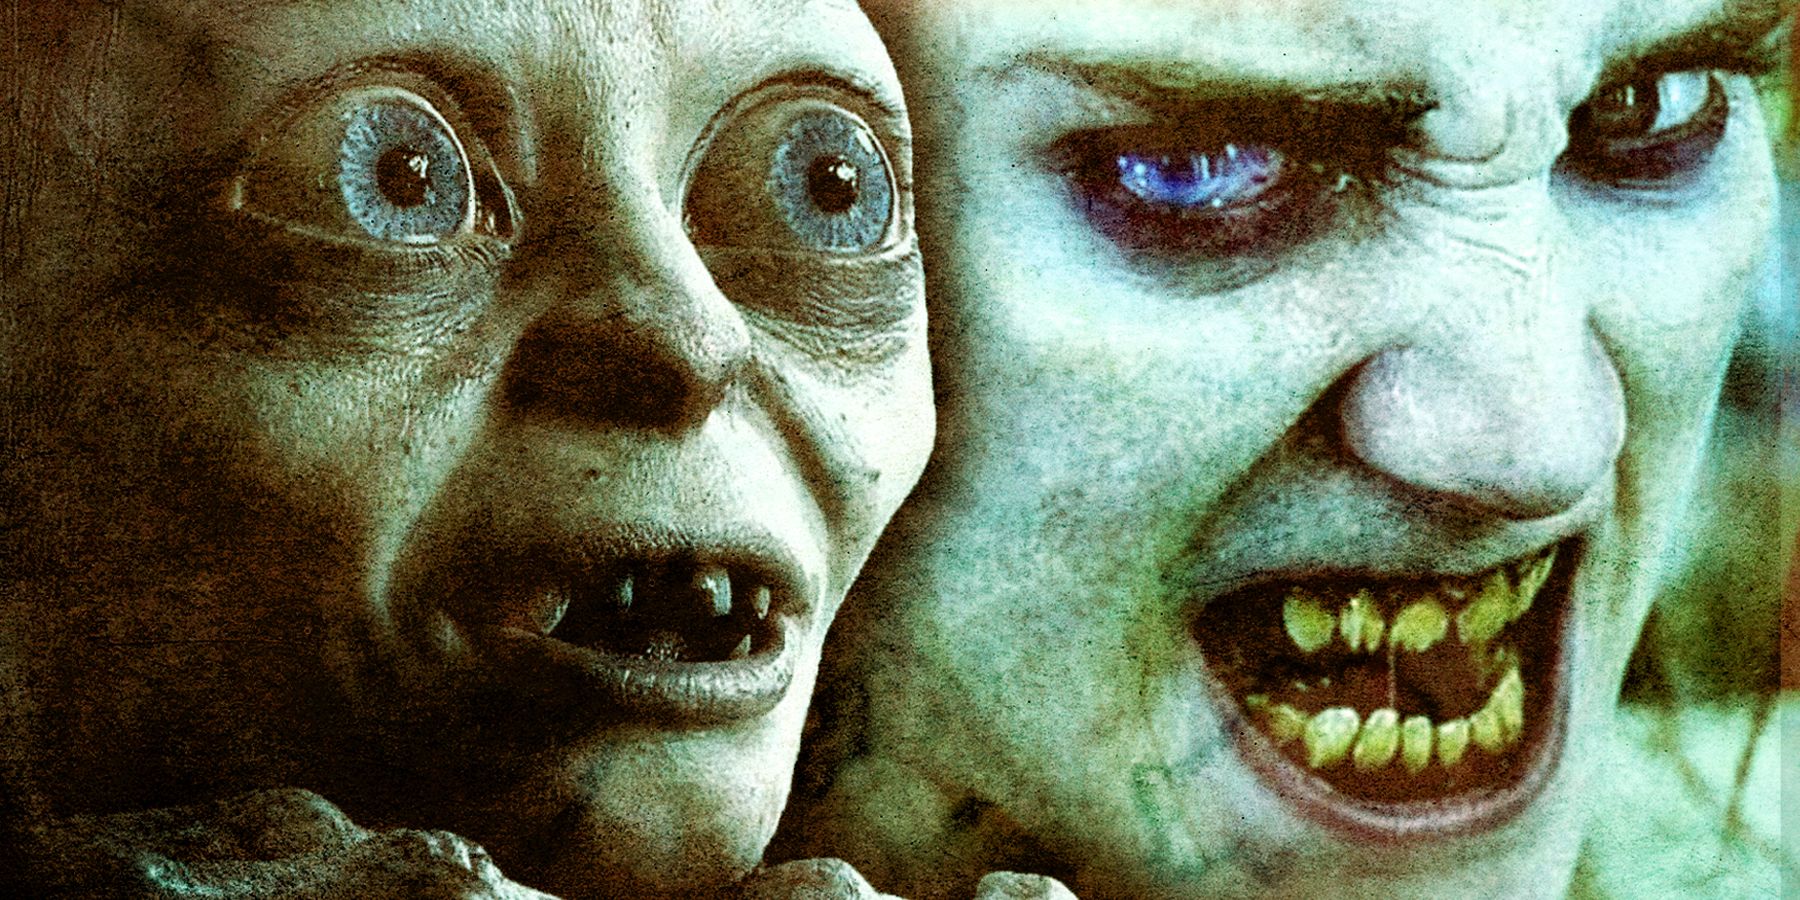 rive ned mål spion A Lord of the Rings Deleted Scene Almost Turned Frodo Into Gollum